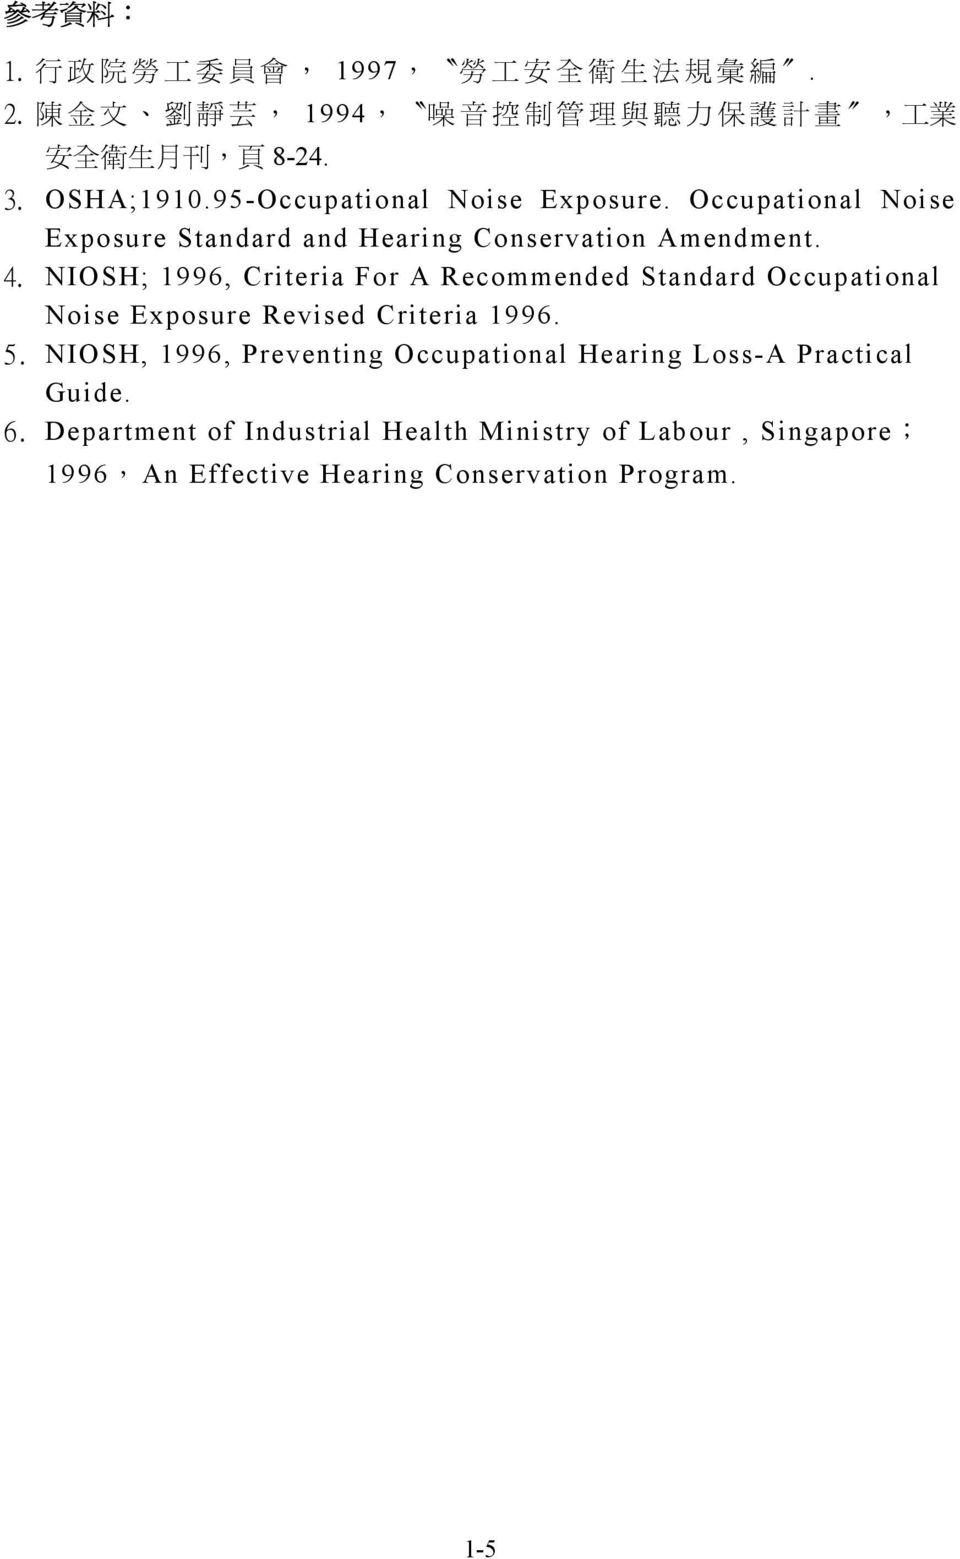 NIOSH; 1996, Criteria For A Recommended Standard Occupational Noise Exposure Revised Criteria 1996.